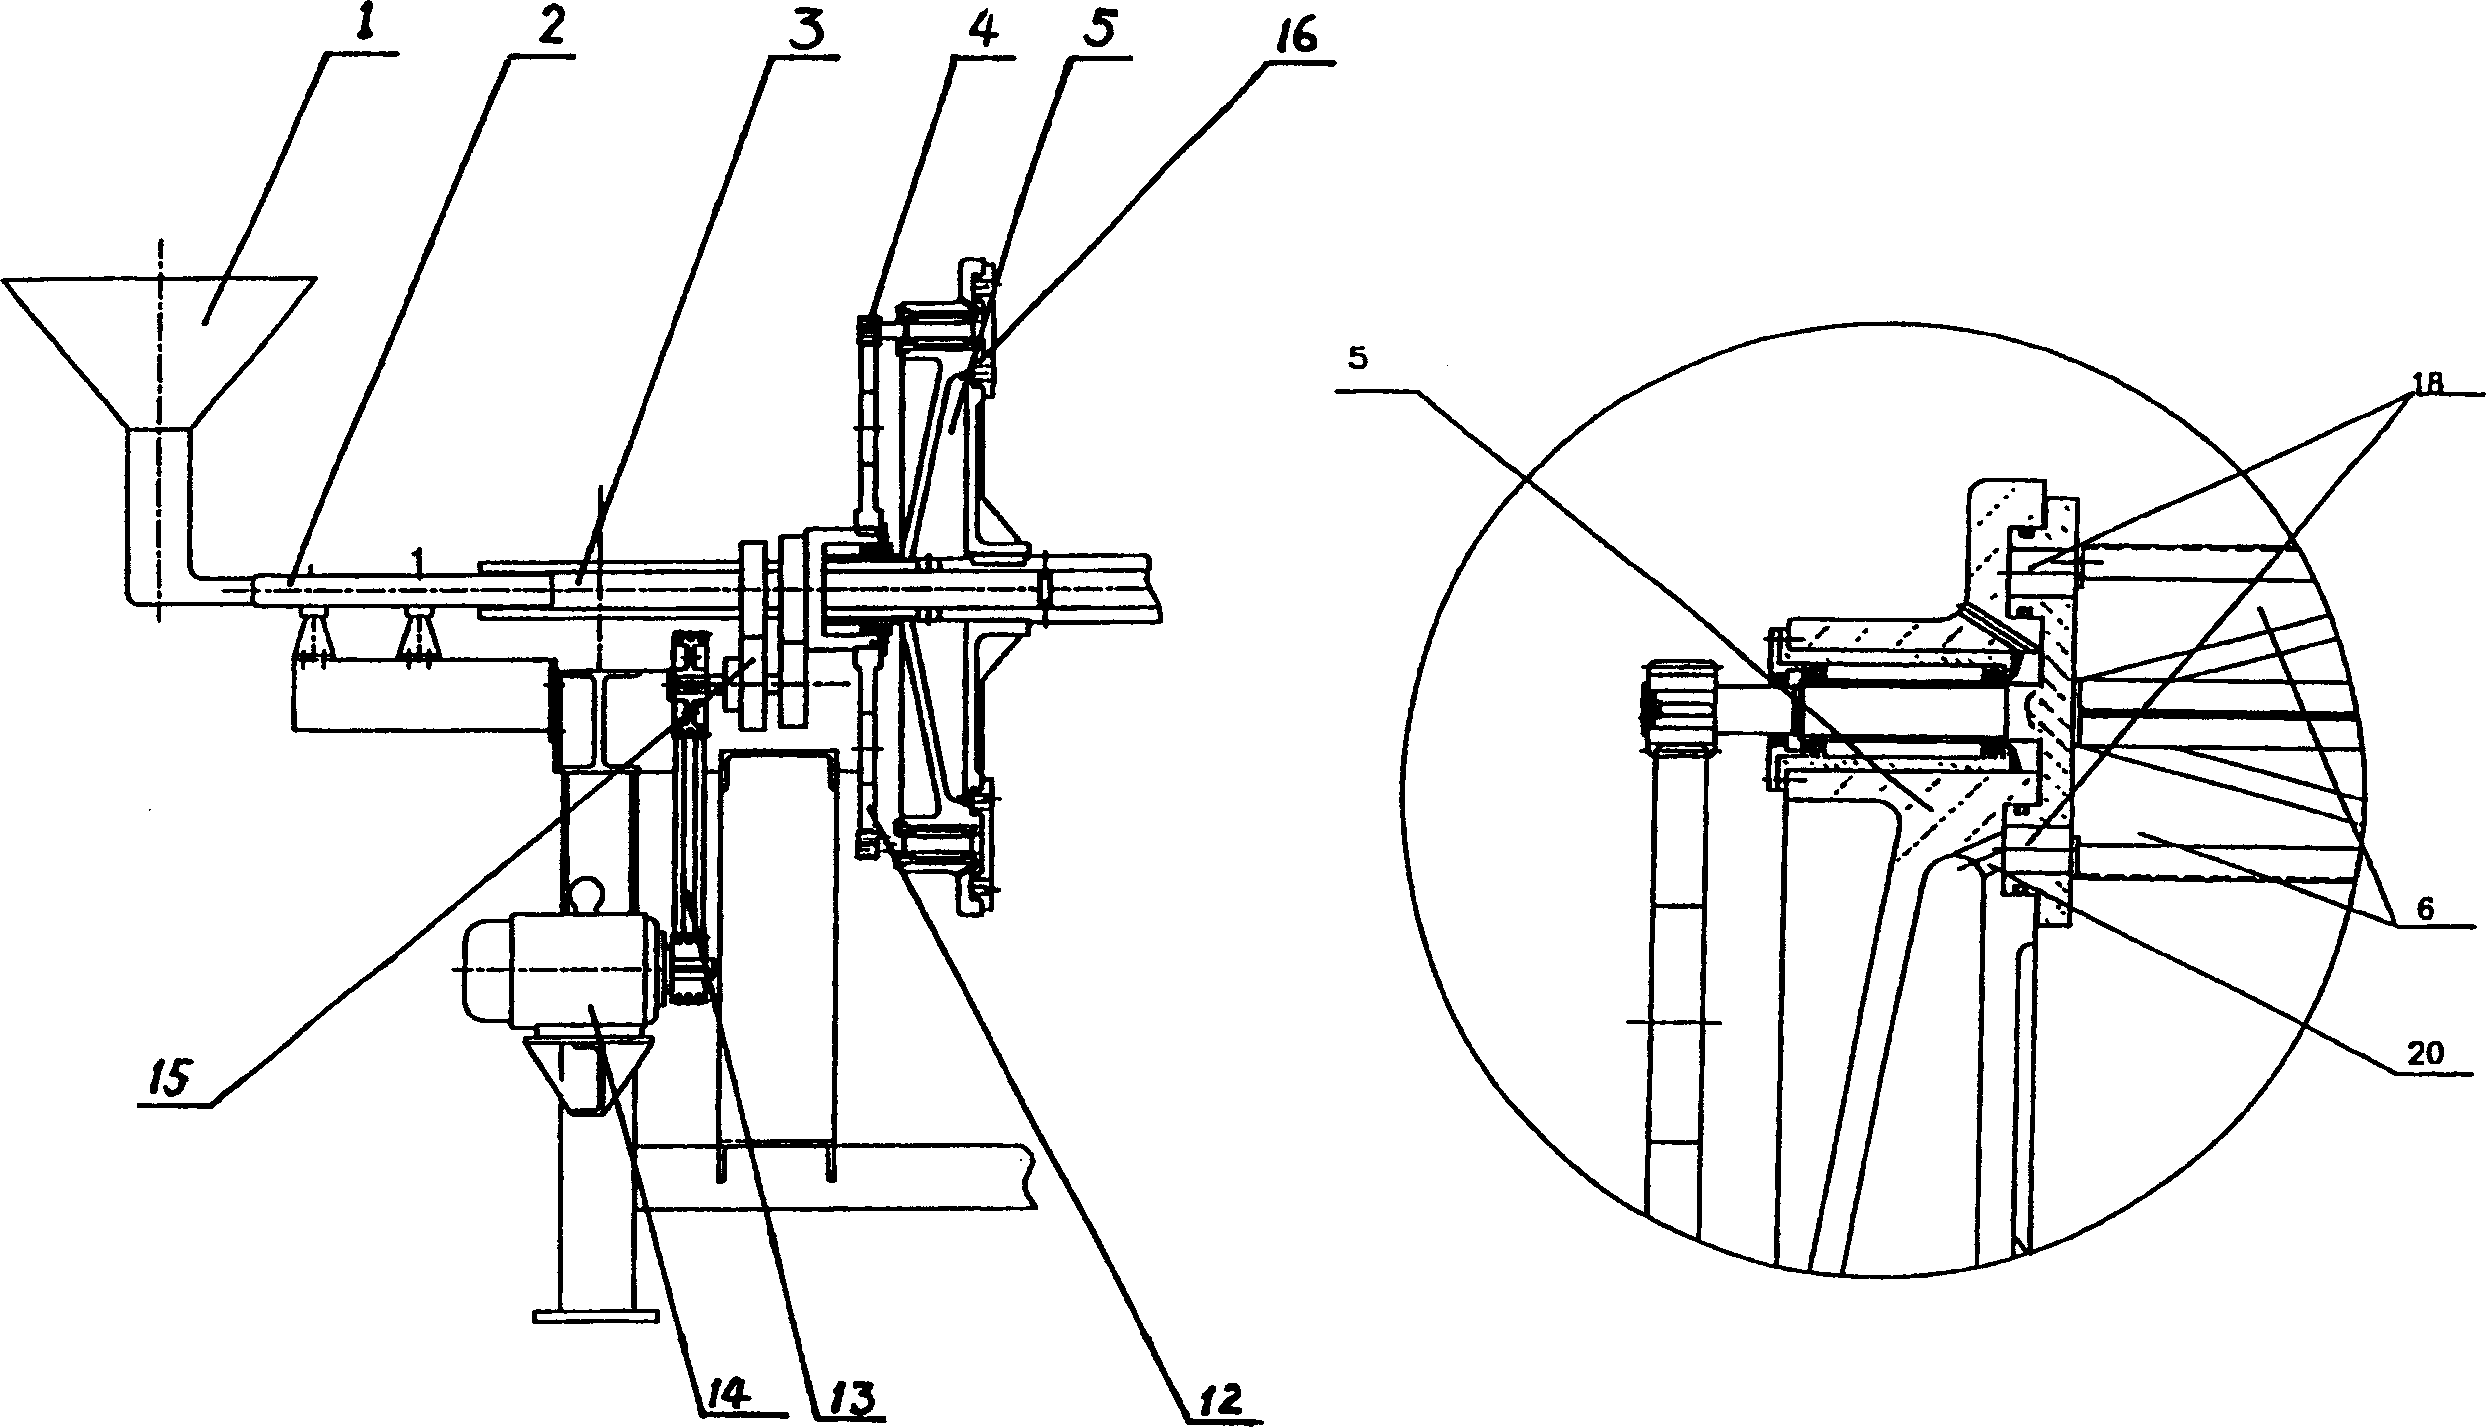 Rotary tapered chute type centrifugal concentrator